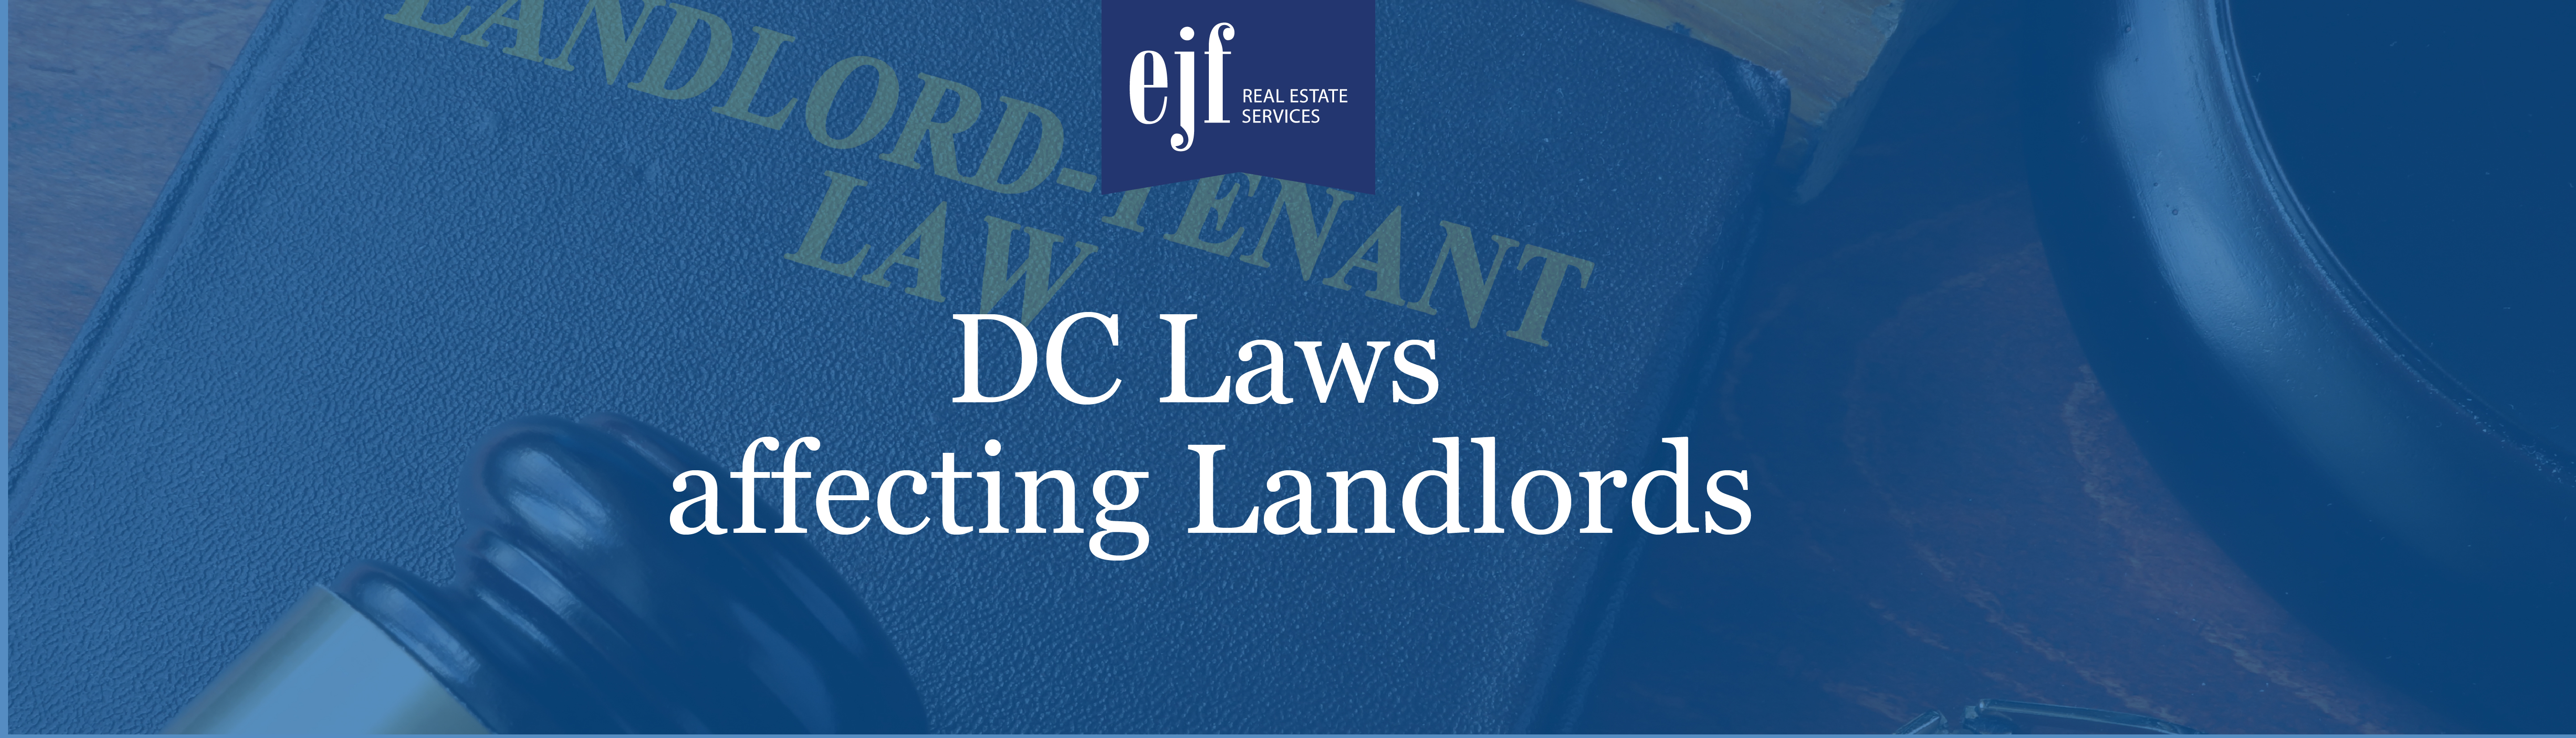 DC Laws affecting Landlords